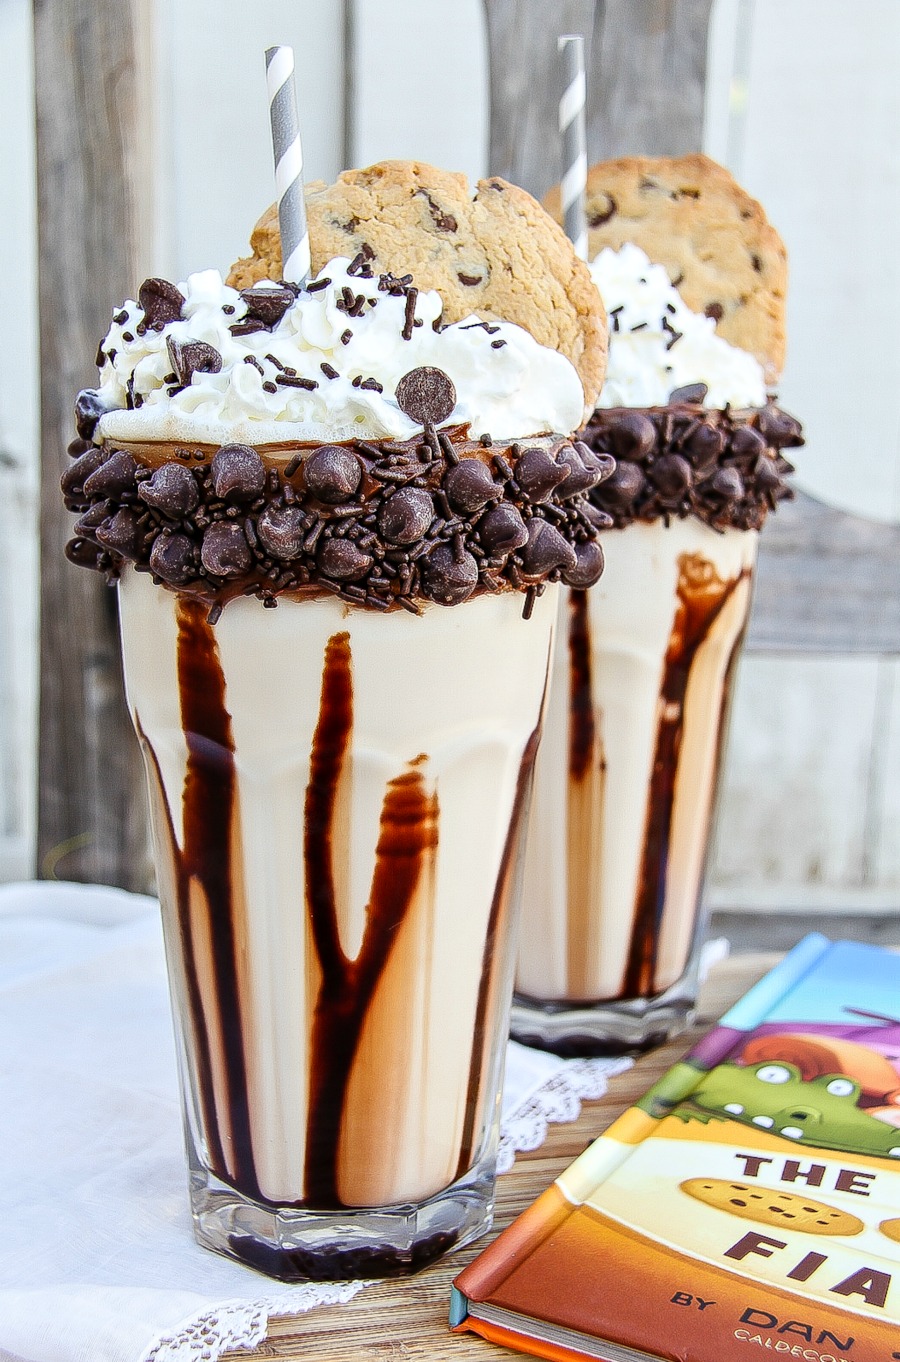 a chocolate chip cookie milkshake with chocolate drizzled inside the glass, the glass rimmed with chocolate chips and the milkshake topped with whipped cream and a chocolate chip cookie